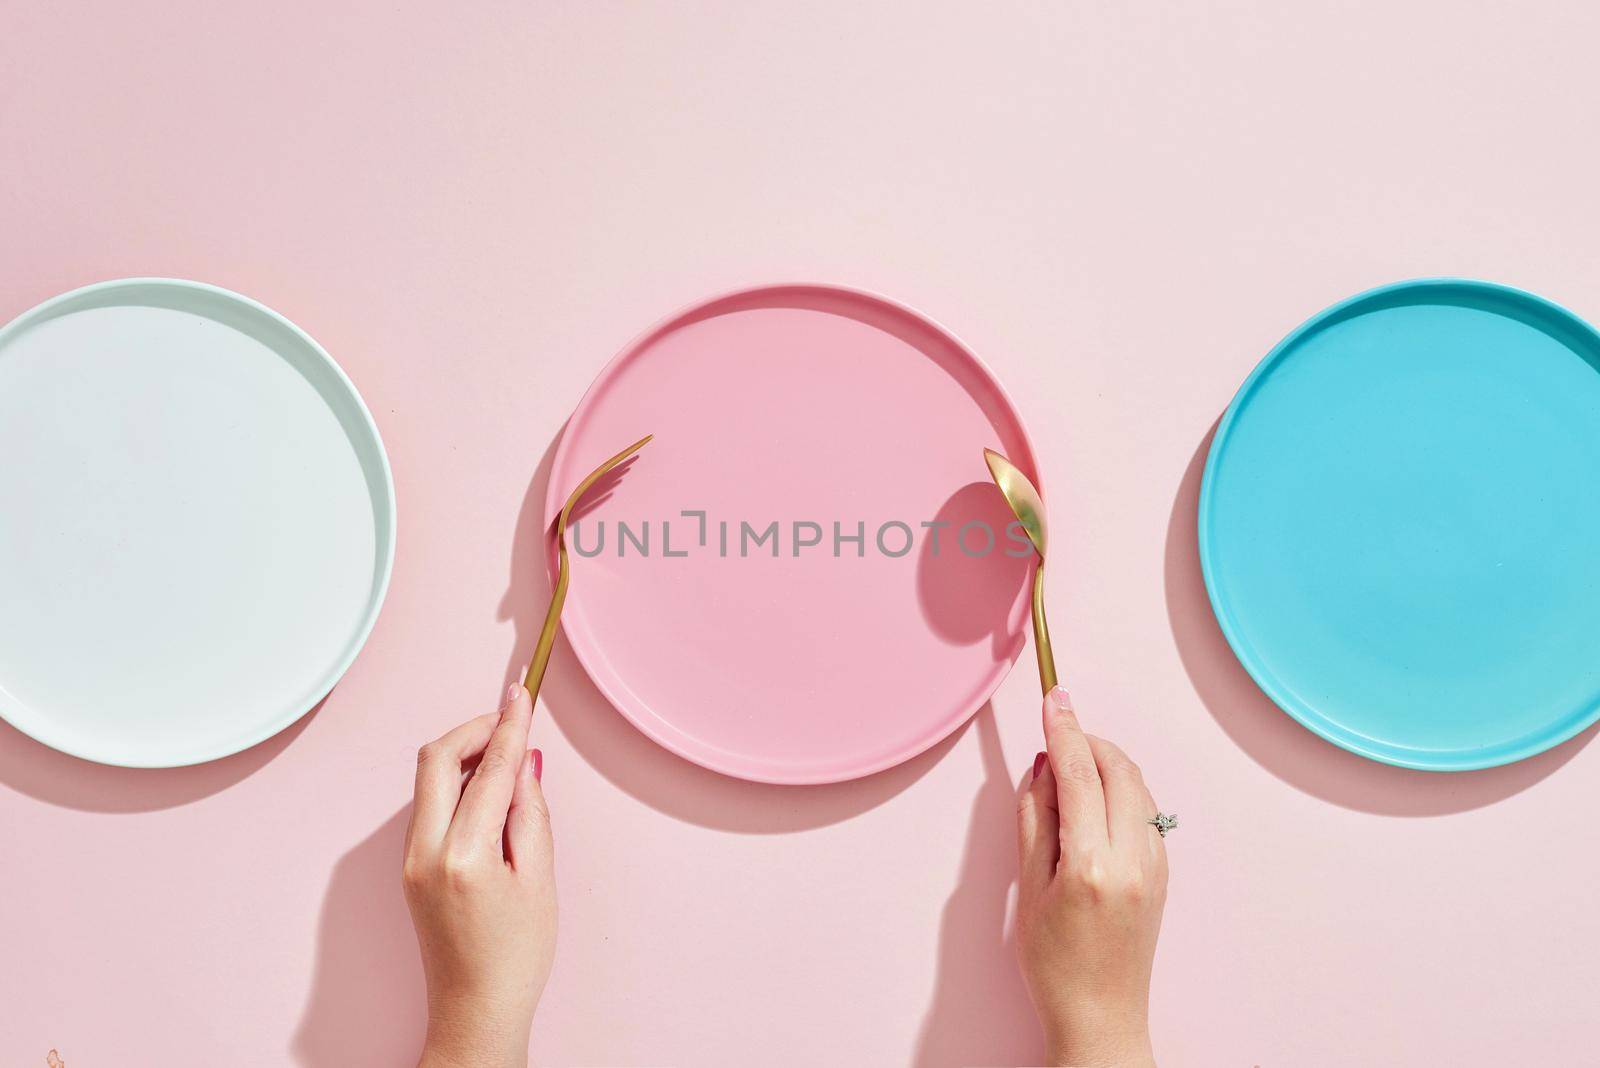 Restaurant and Food theme: the human hand show gesture on an empty three color plates on a pink background